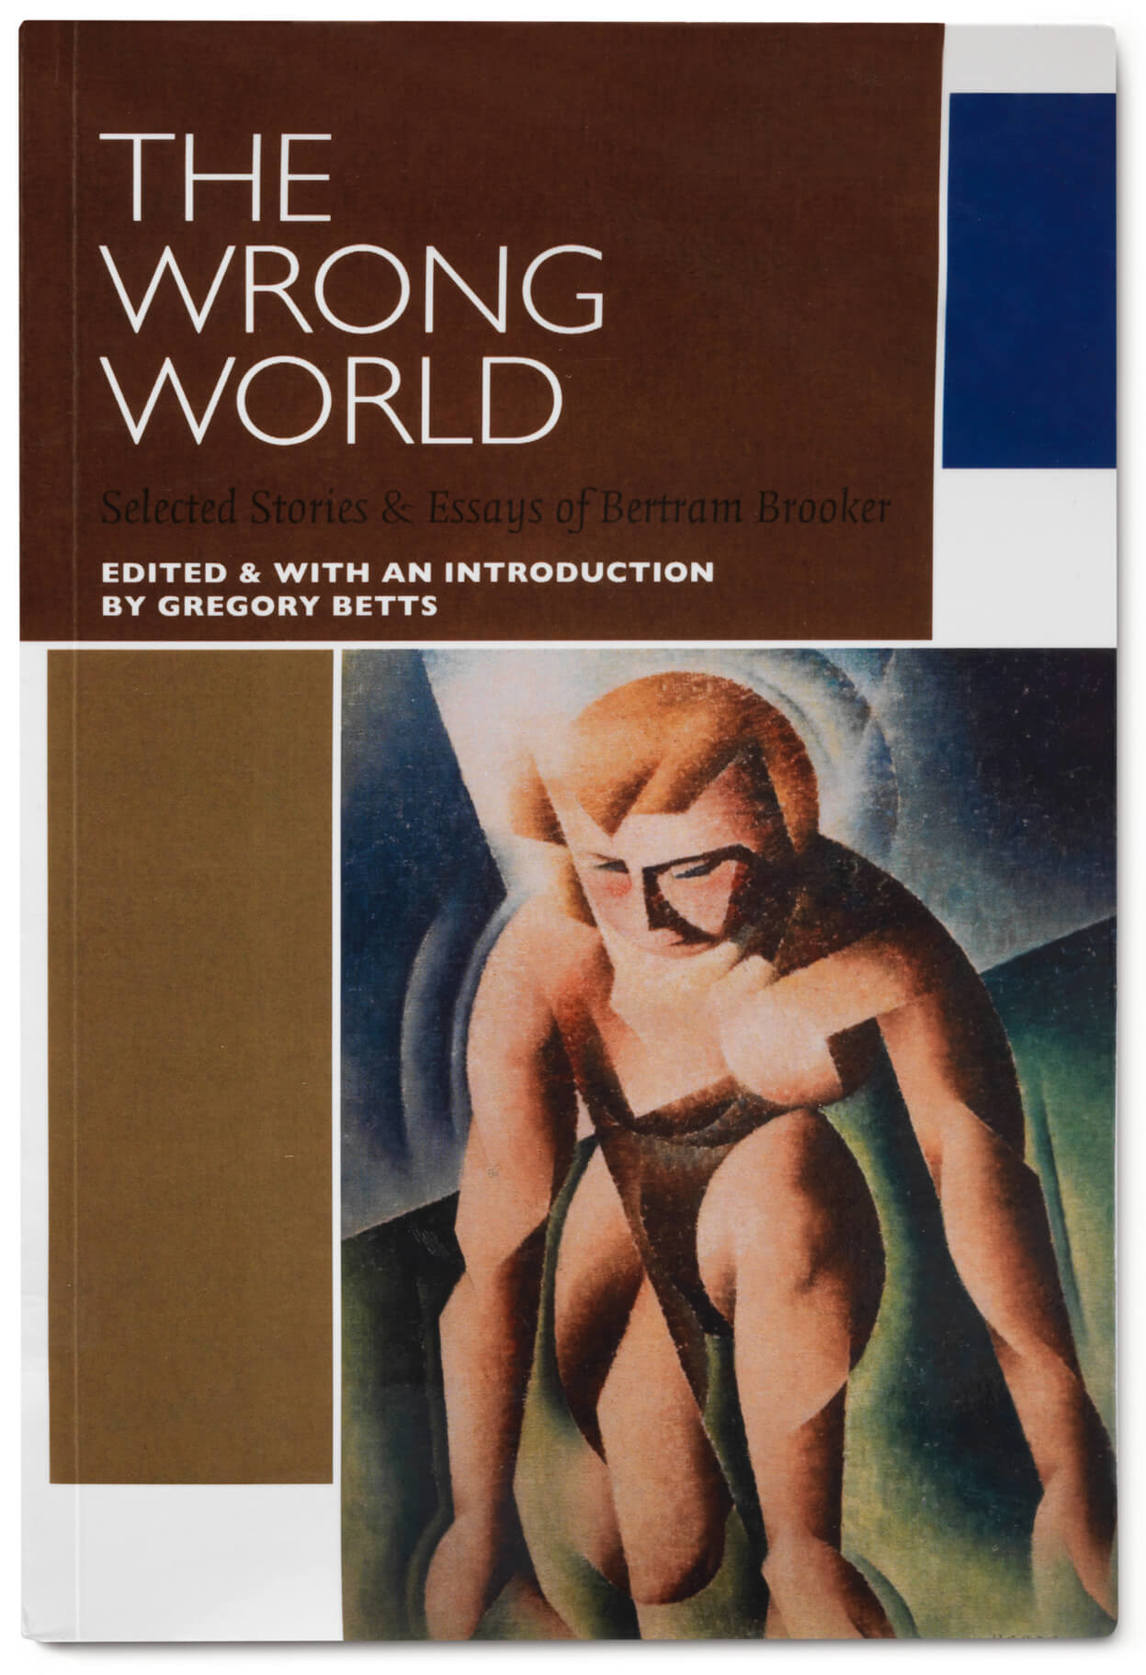 Page couverture de The Wrong World: Selected Stories and Essays by Bertram Brooker, Gregory Betts, éd.